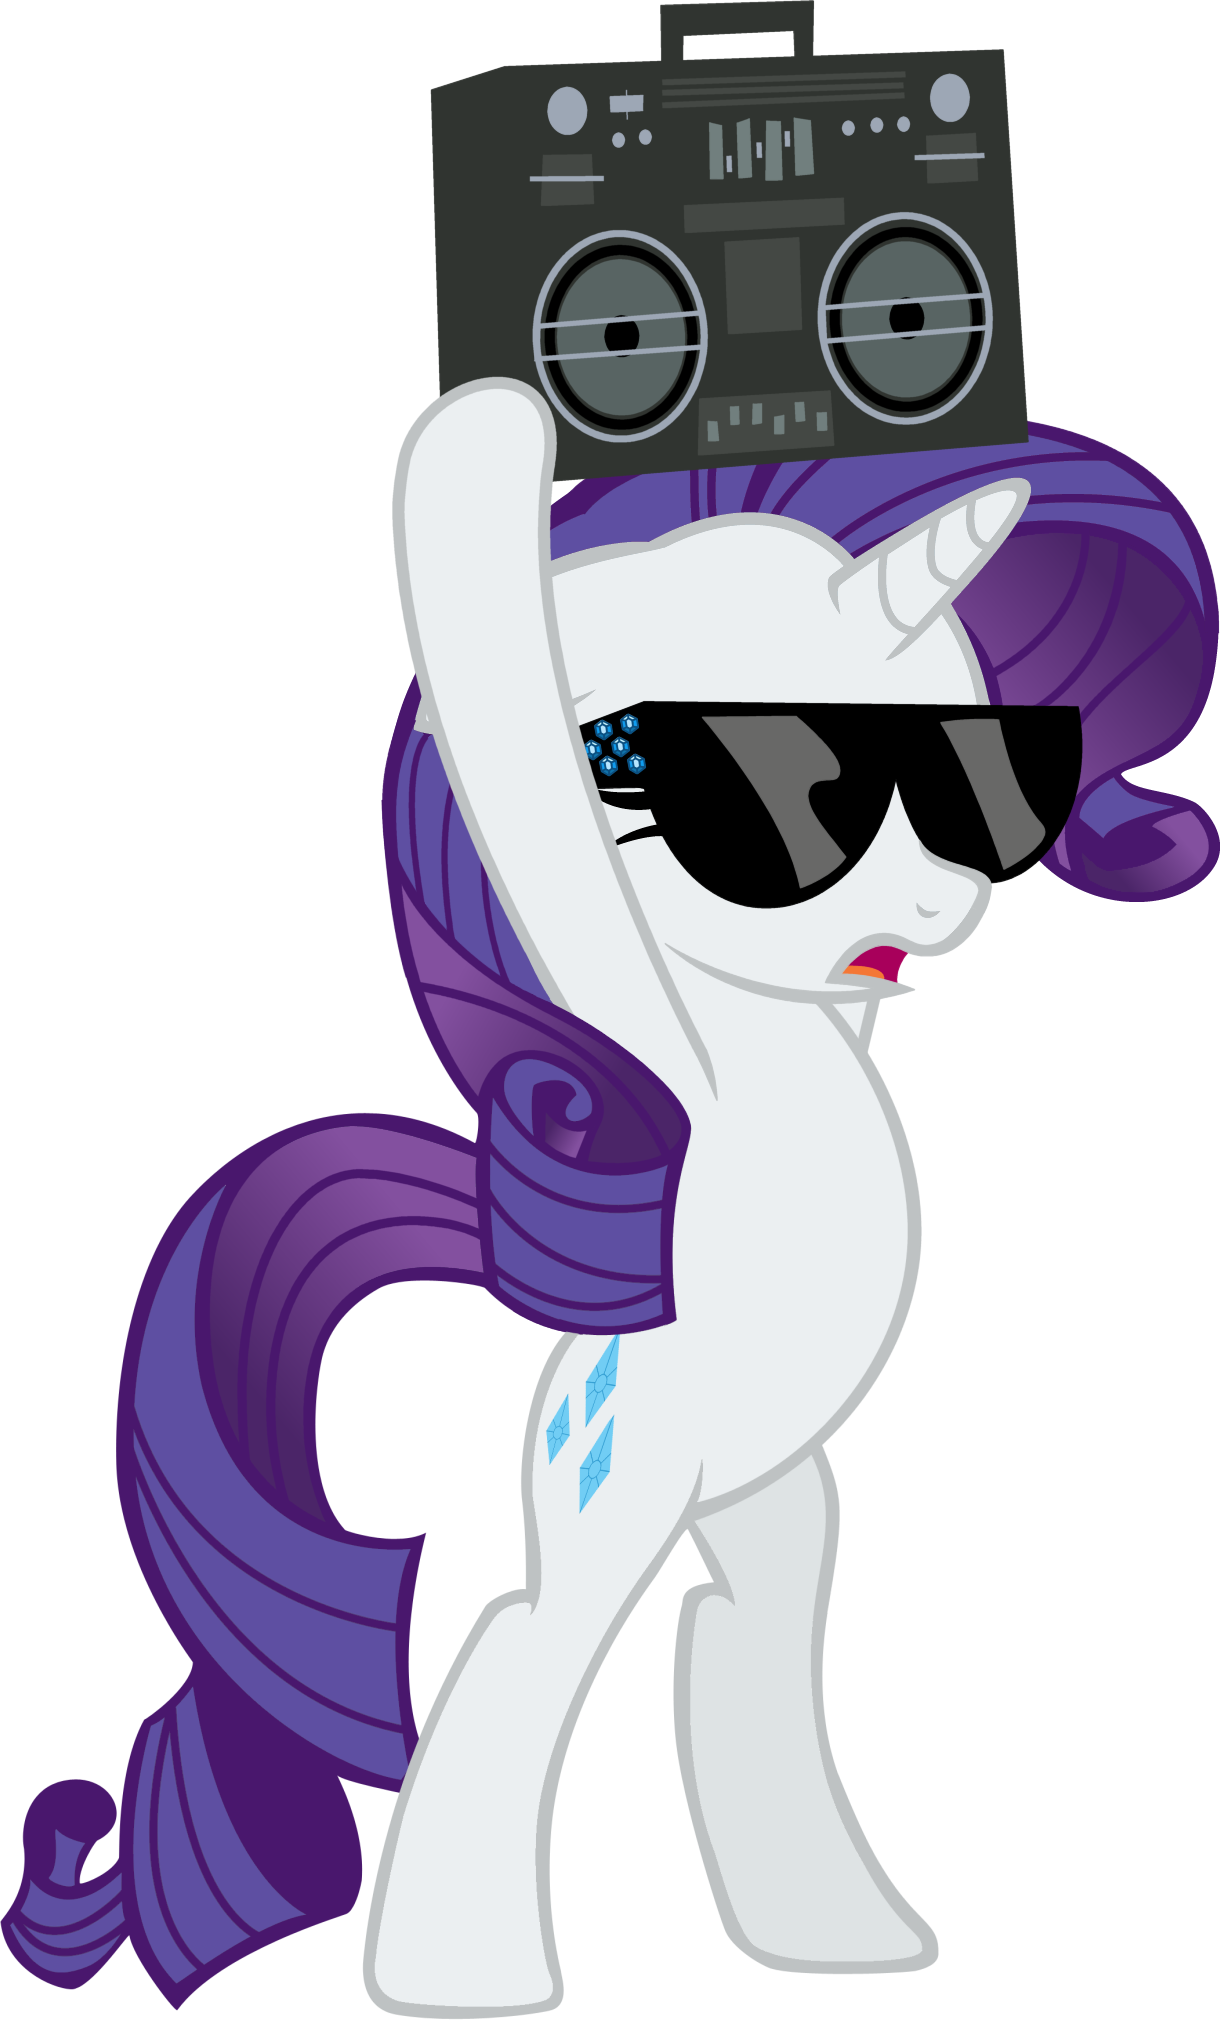 boombox_rarity_by_delphince-d57jrp0.png